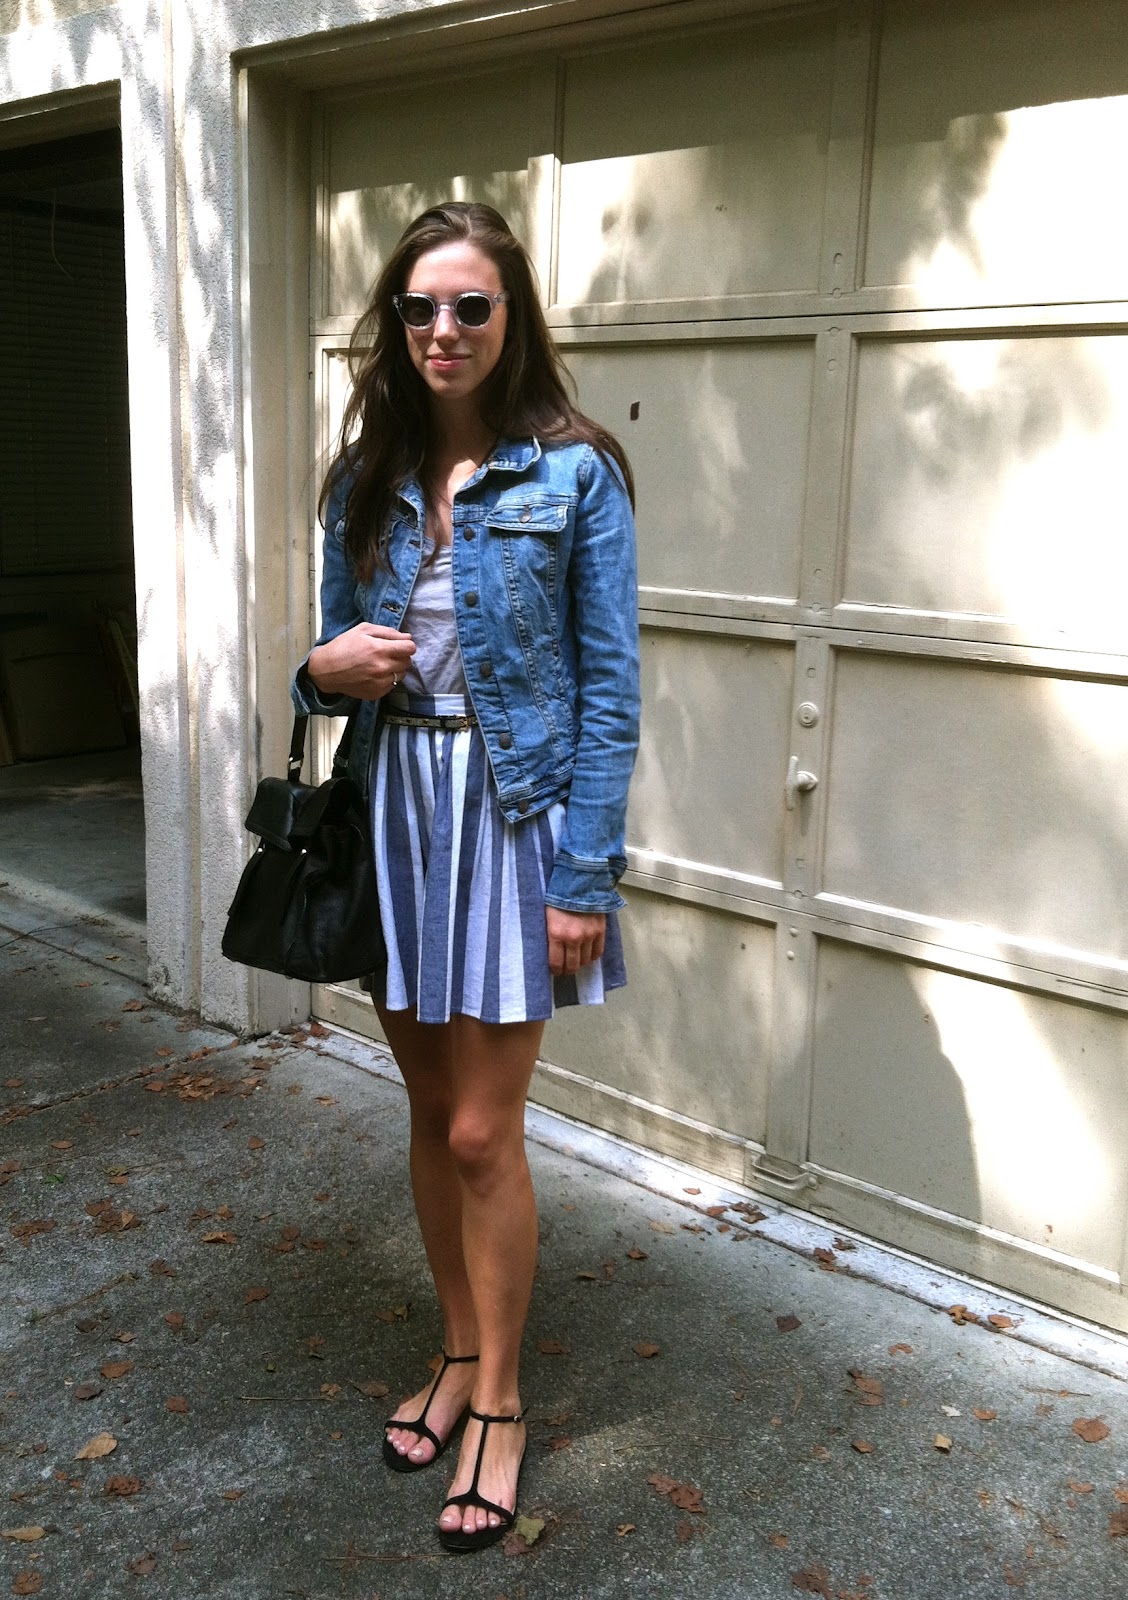 Epitome of Chic: Denim and Chambray